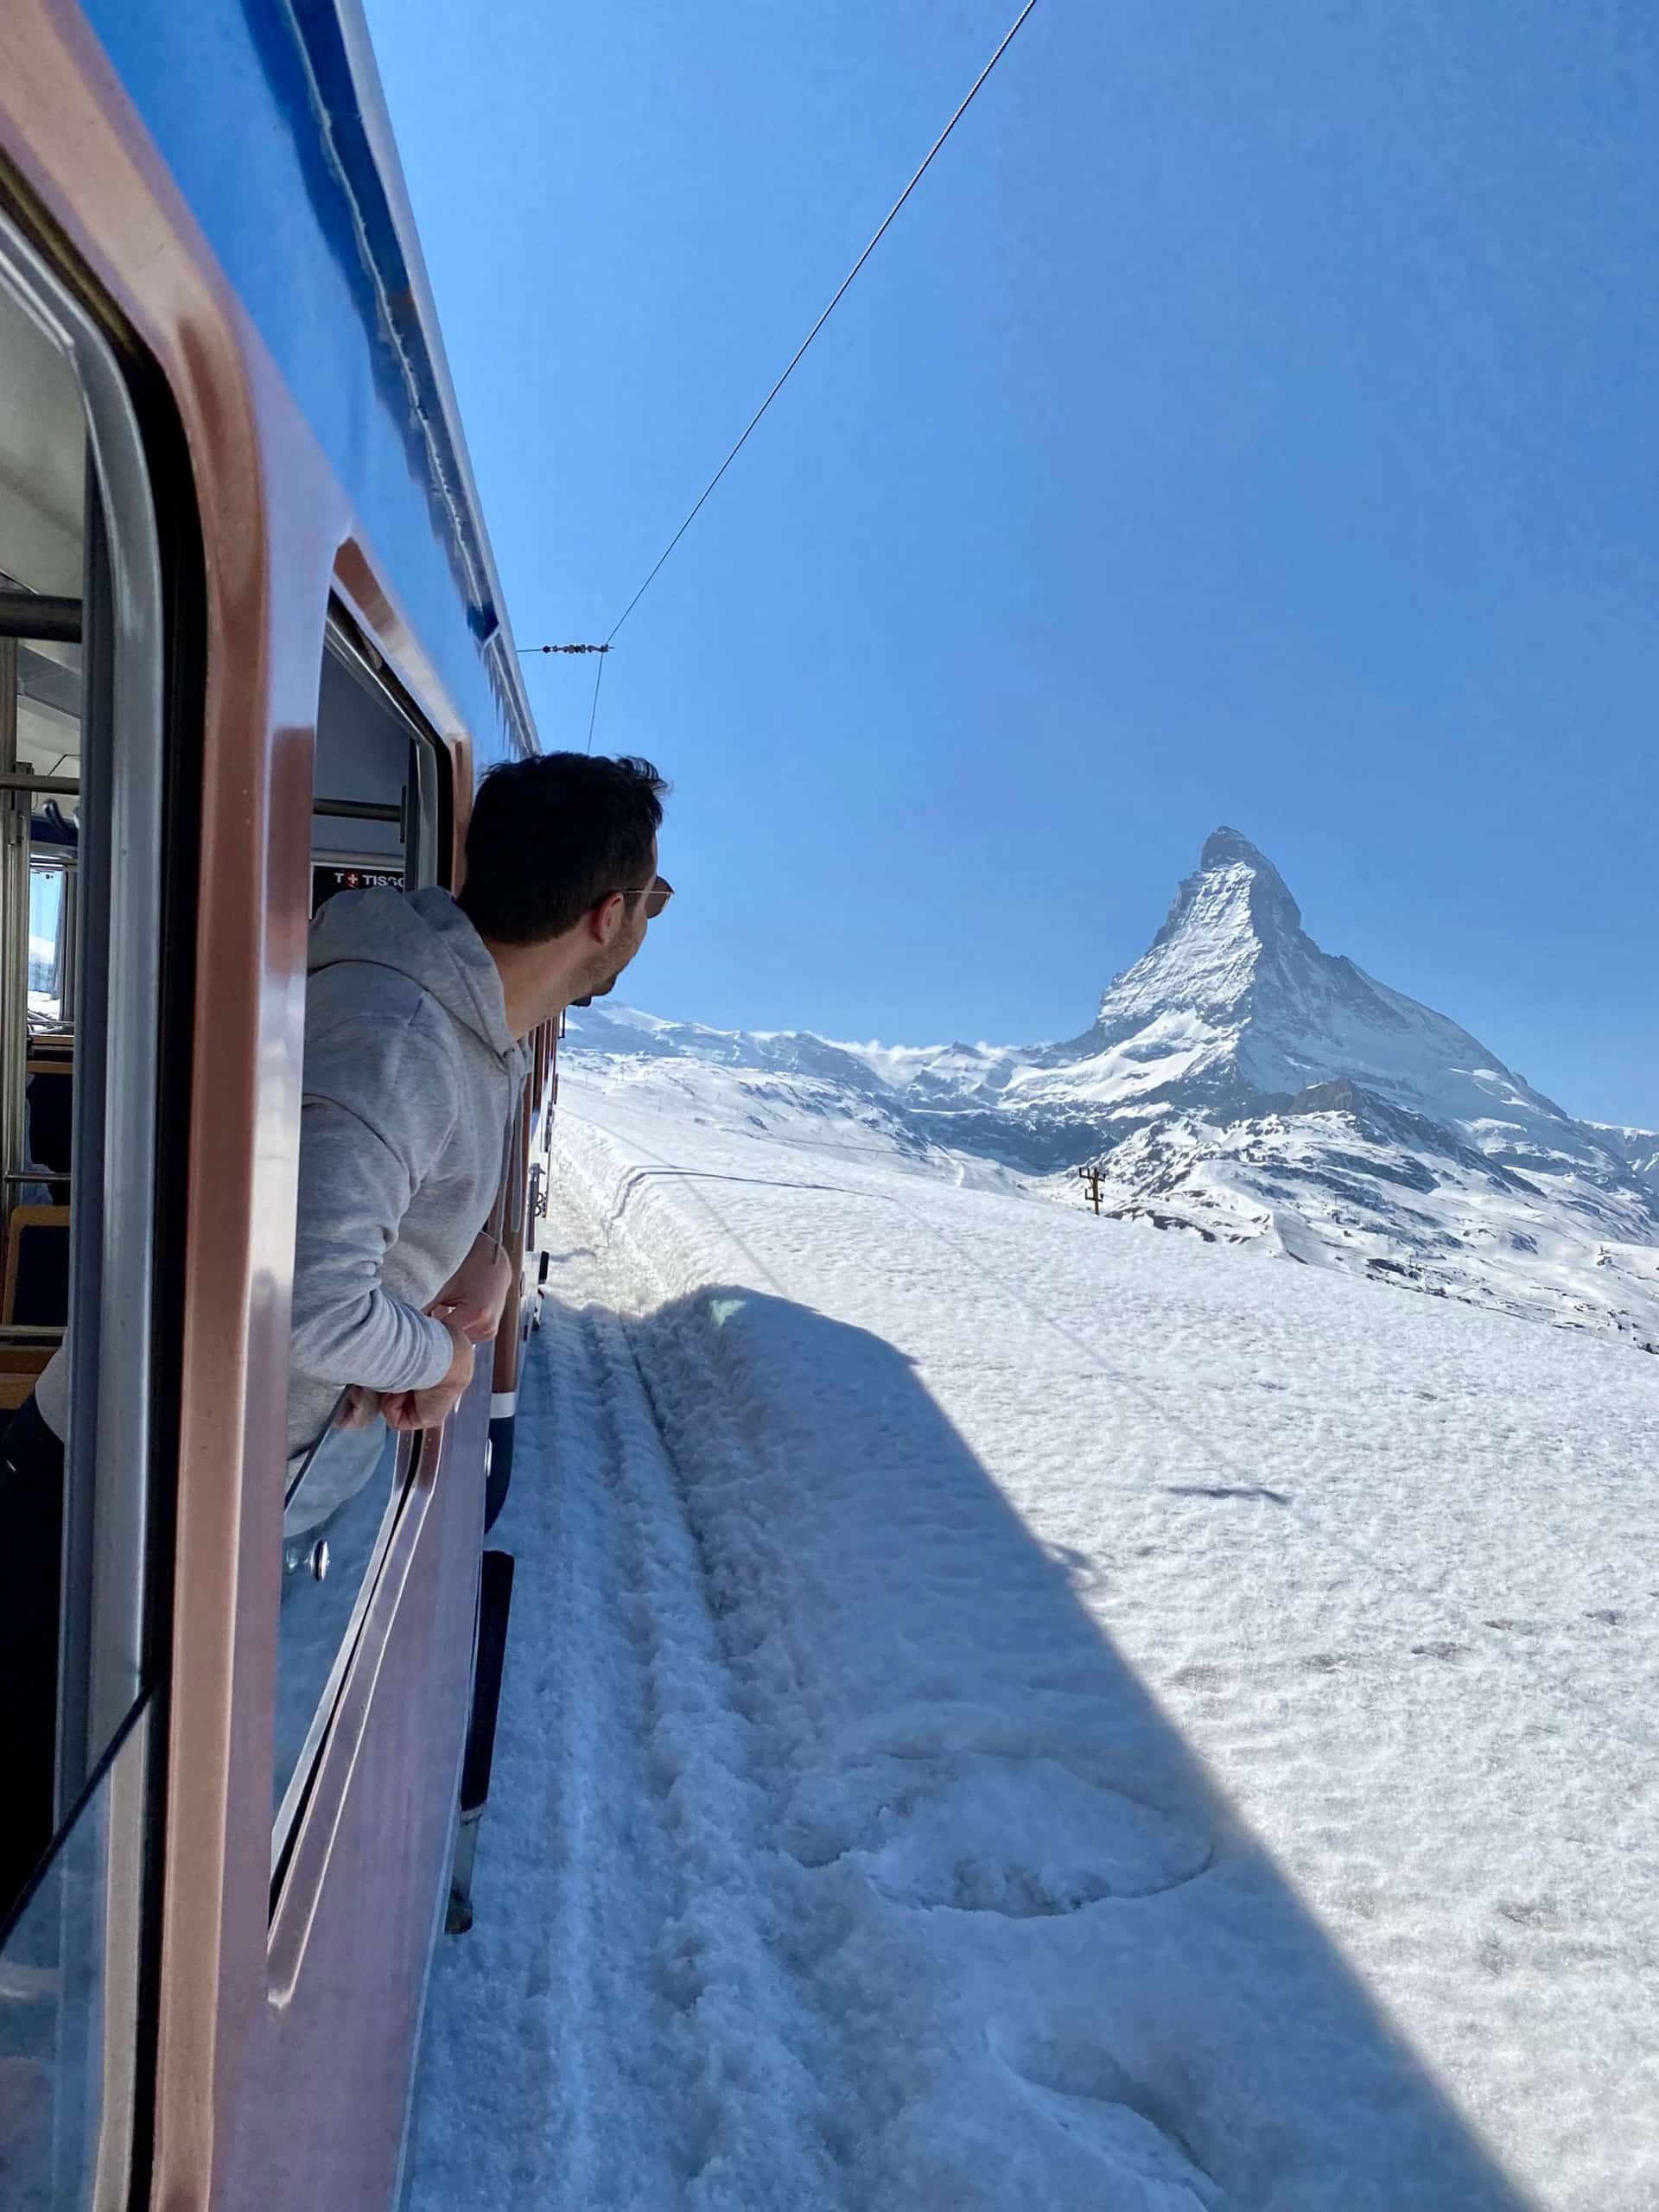 Zermatt 2 Days Guided Private Tour (from Bern)